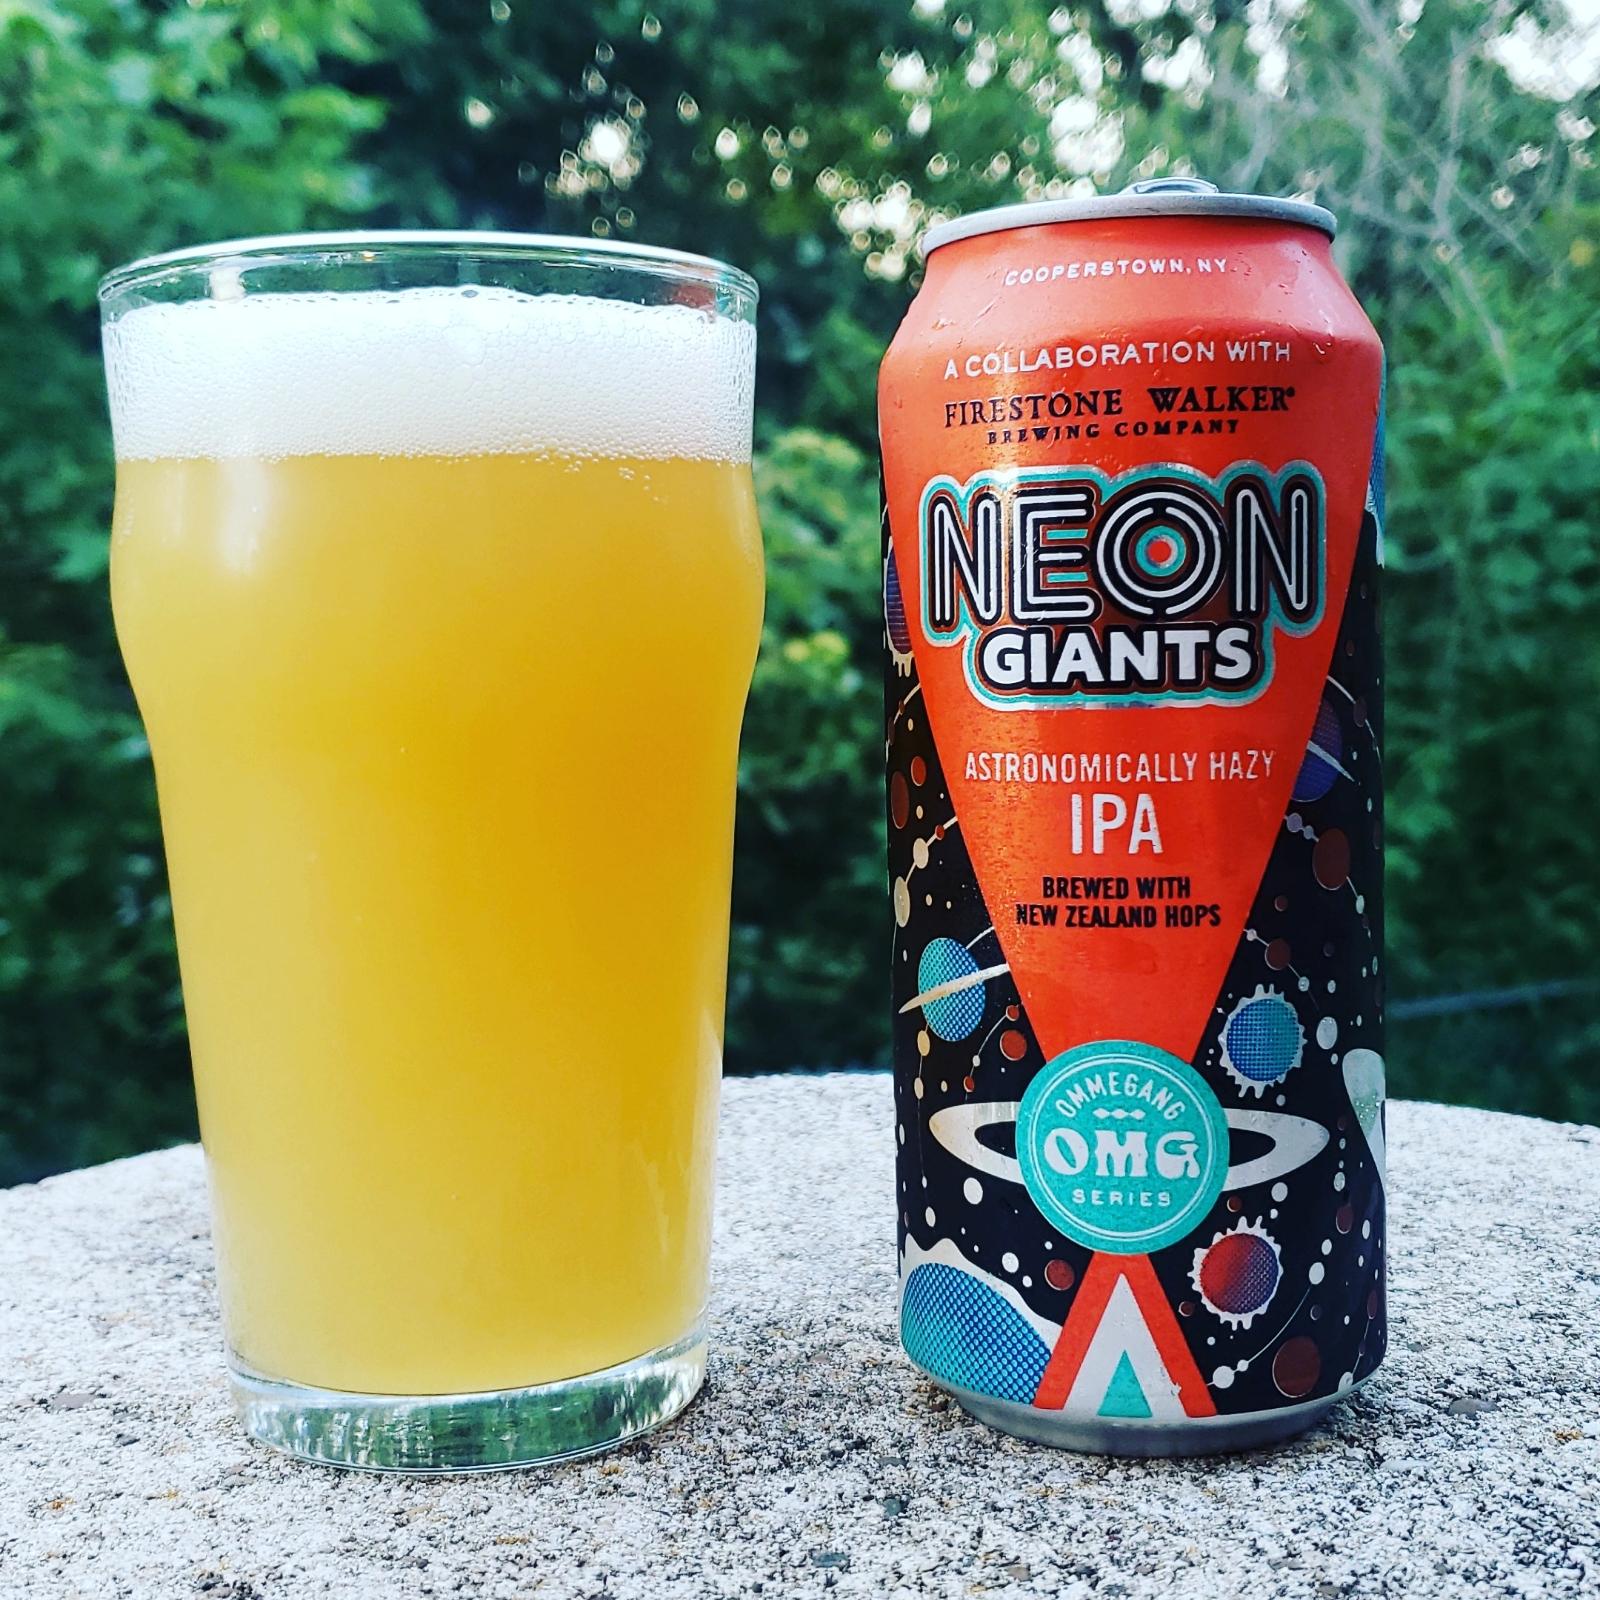 Neon Giants (Collaboration with Firestone Walker Brewing)